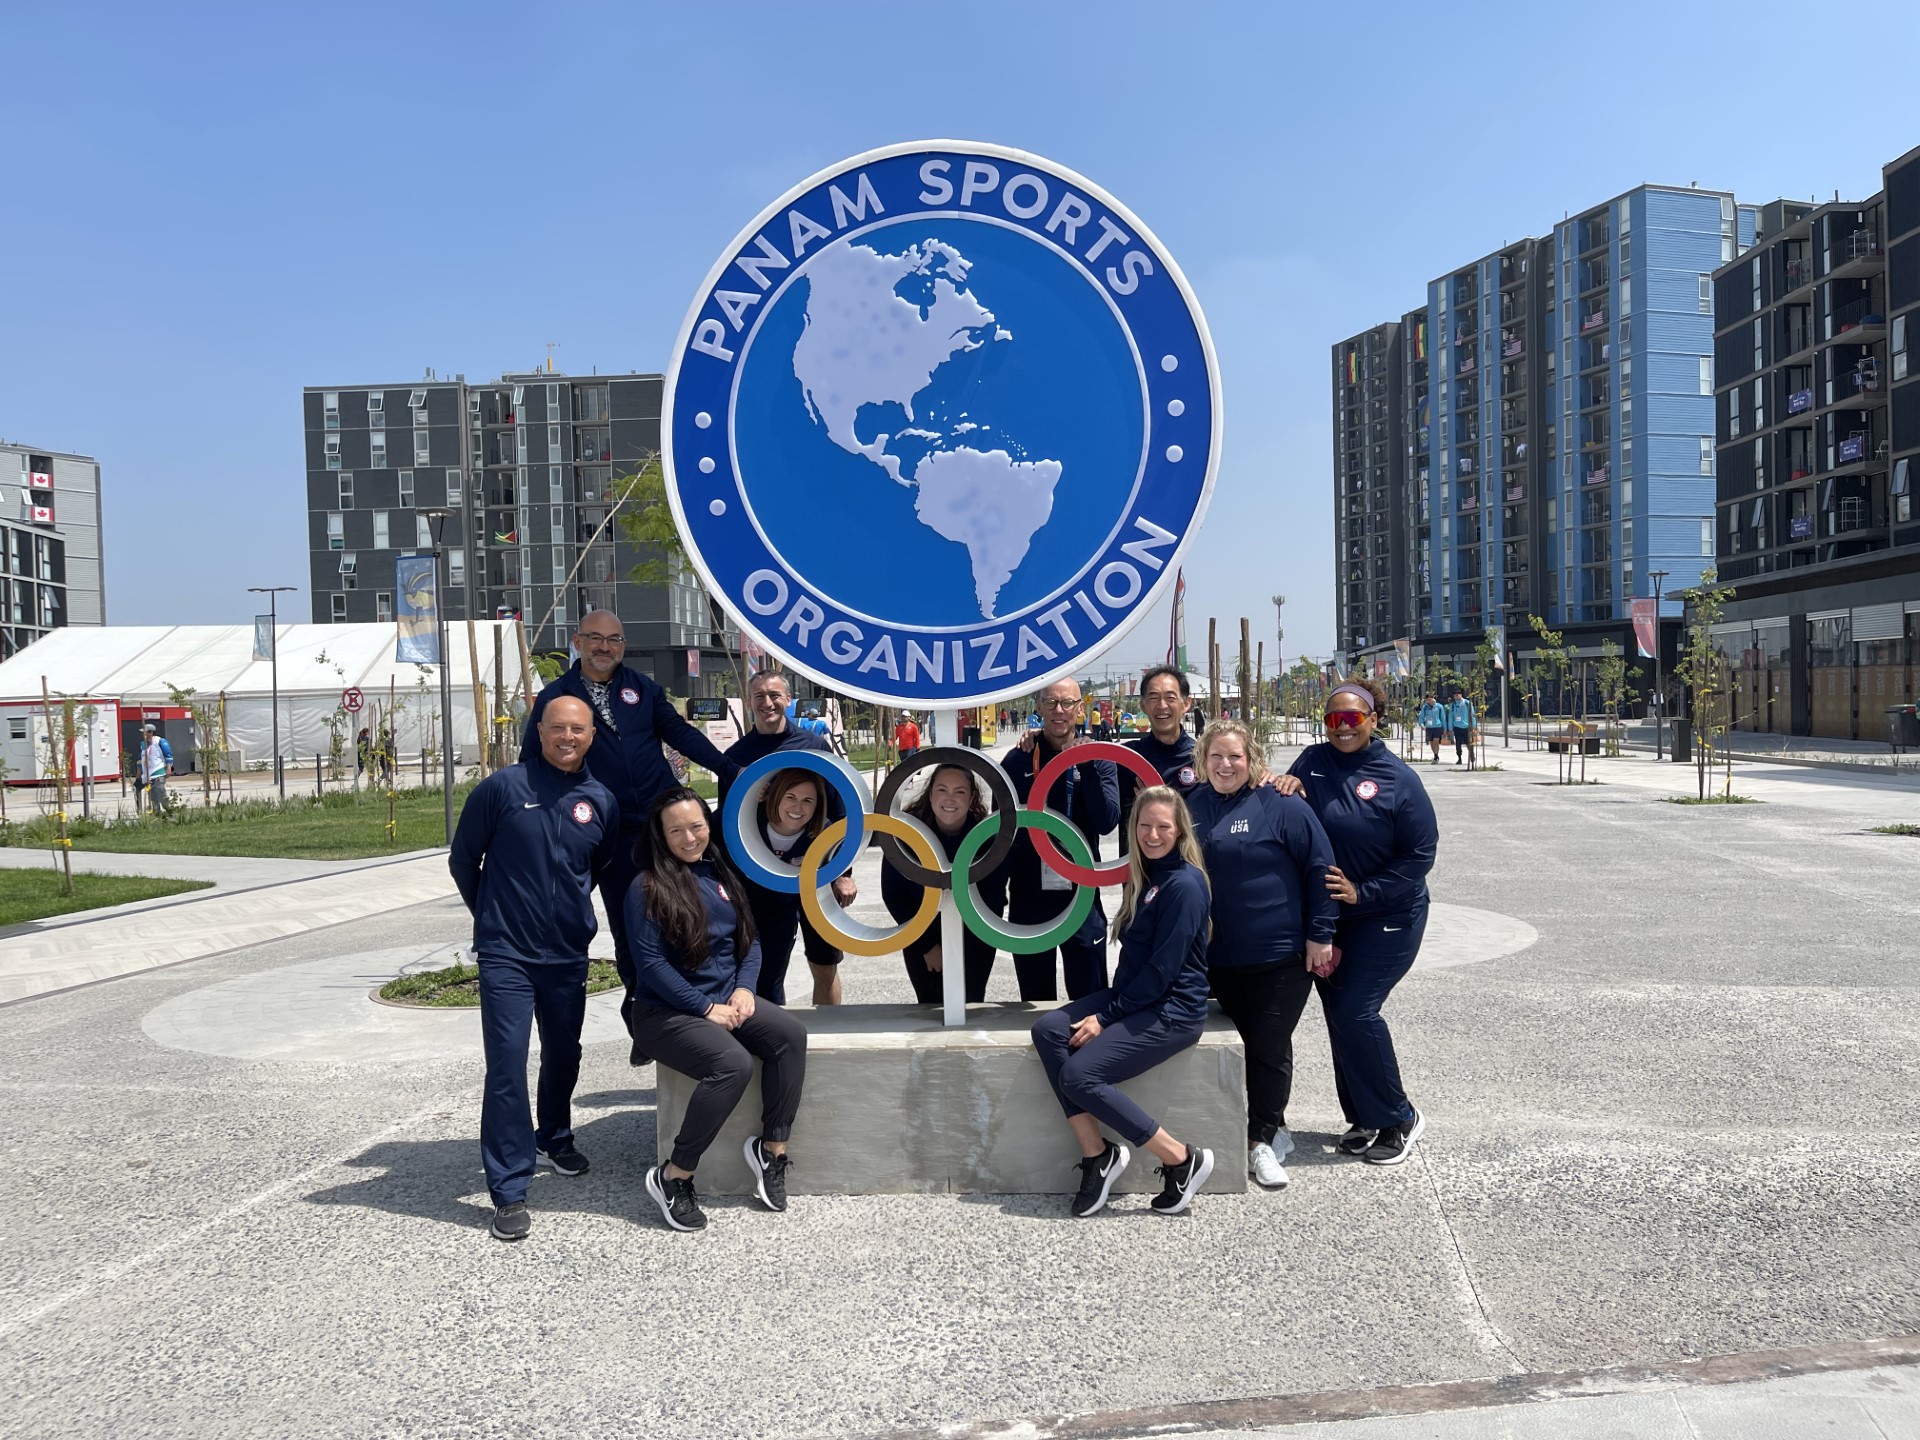 Carlo Guadagno, DC, DACBSP®, ICSC, FICC, a National University of Health Sciences’ Florida faculty member, poses with the U.S. Olympic and Paralympic Committee medical staff.